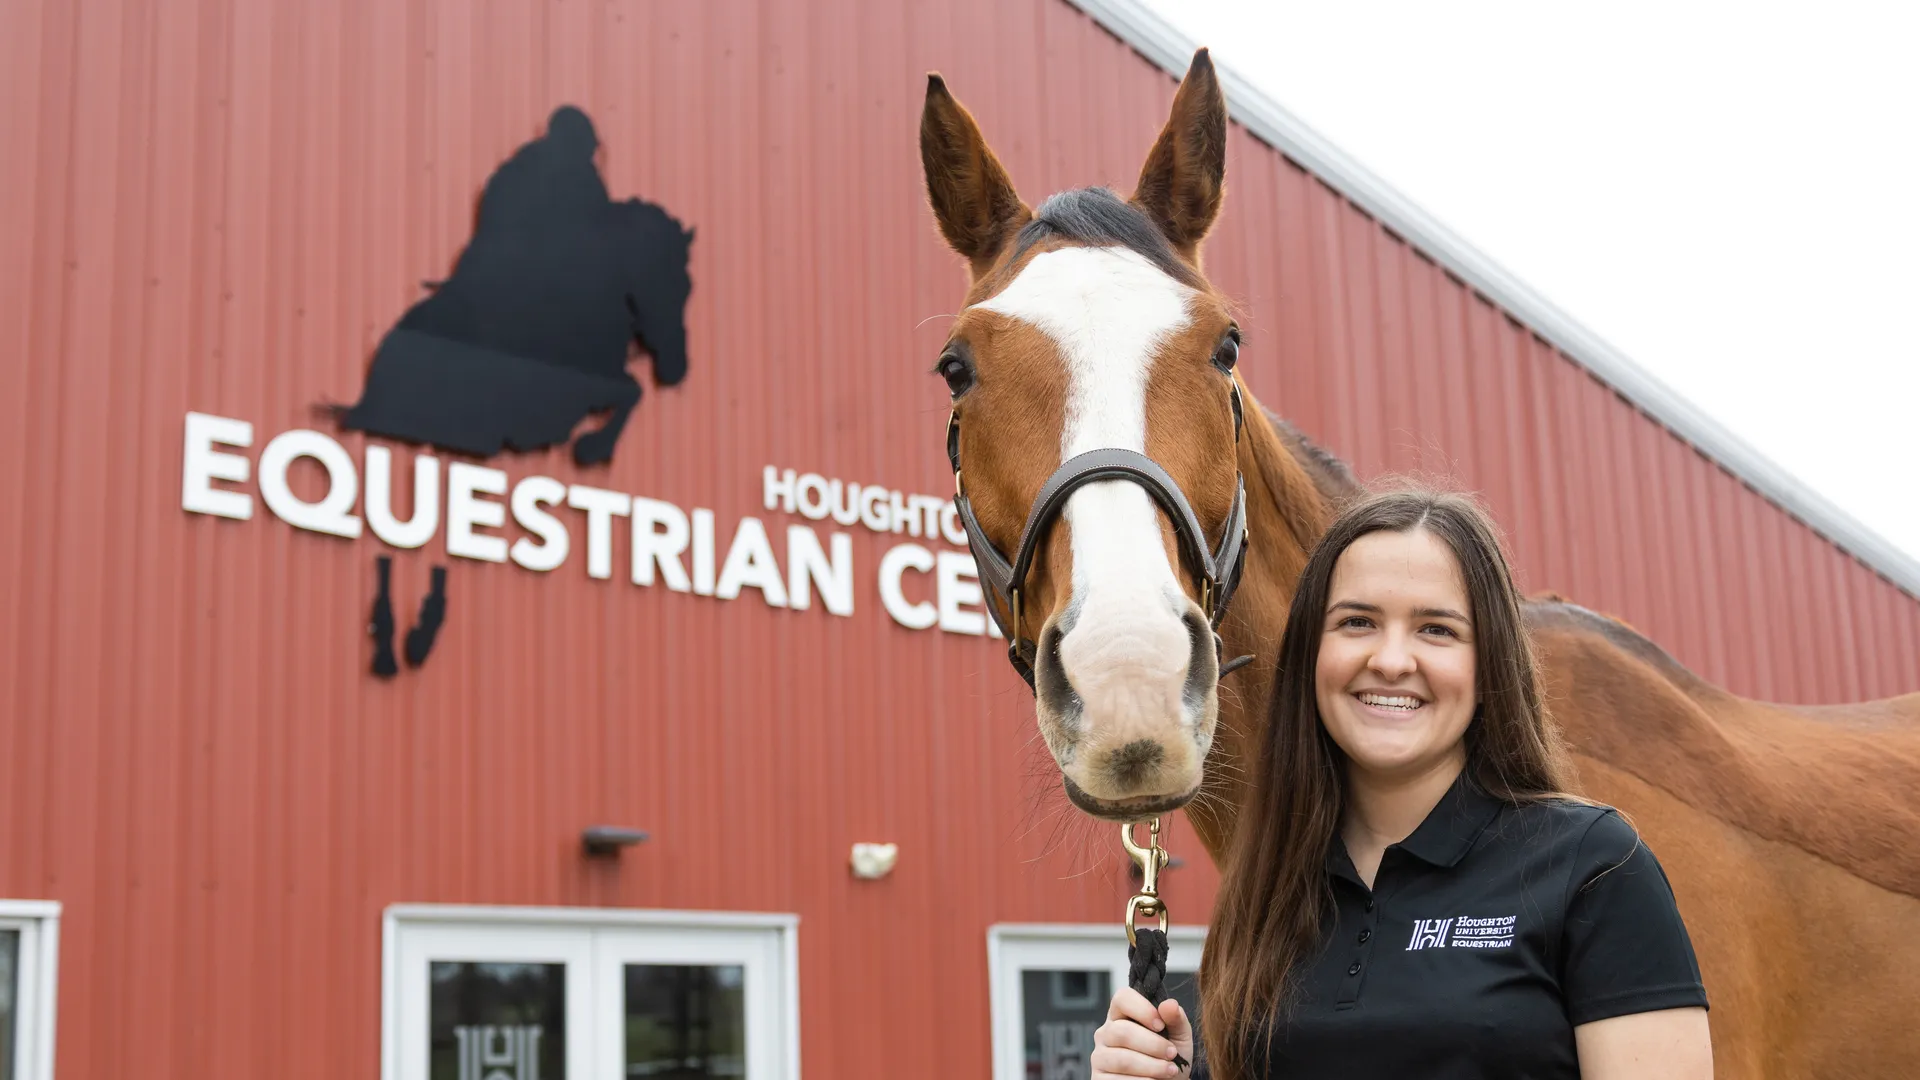 Houghton equestrian student Cassidy Kuhlmann standing with horse in front of equestrian center.